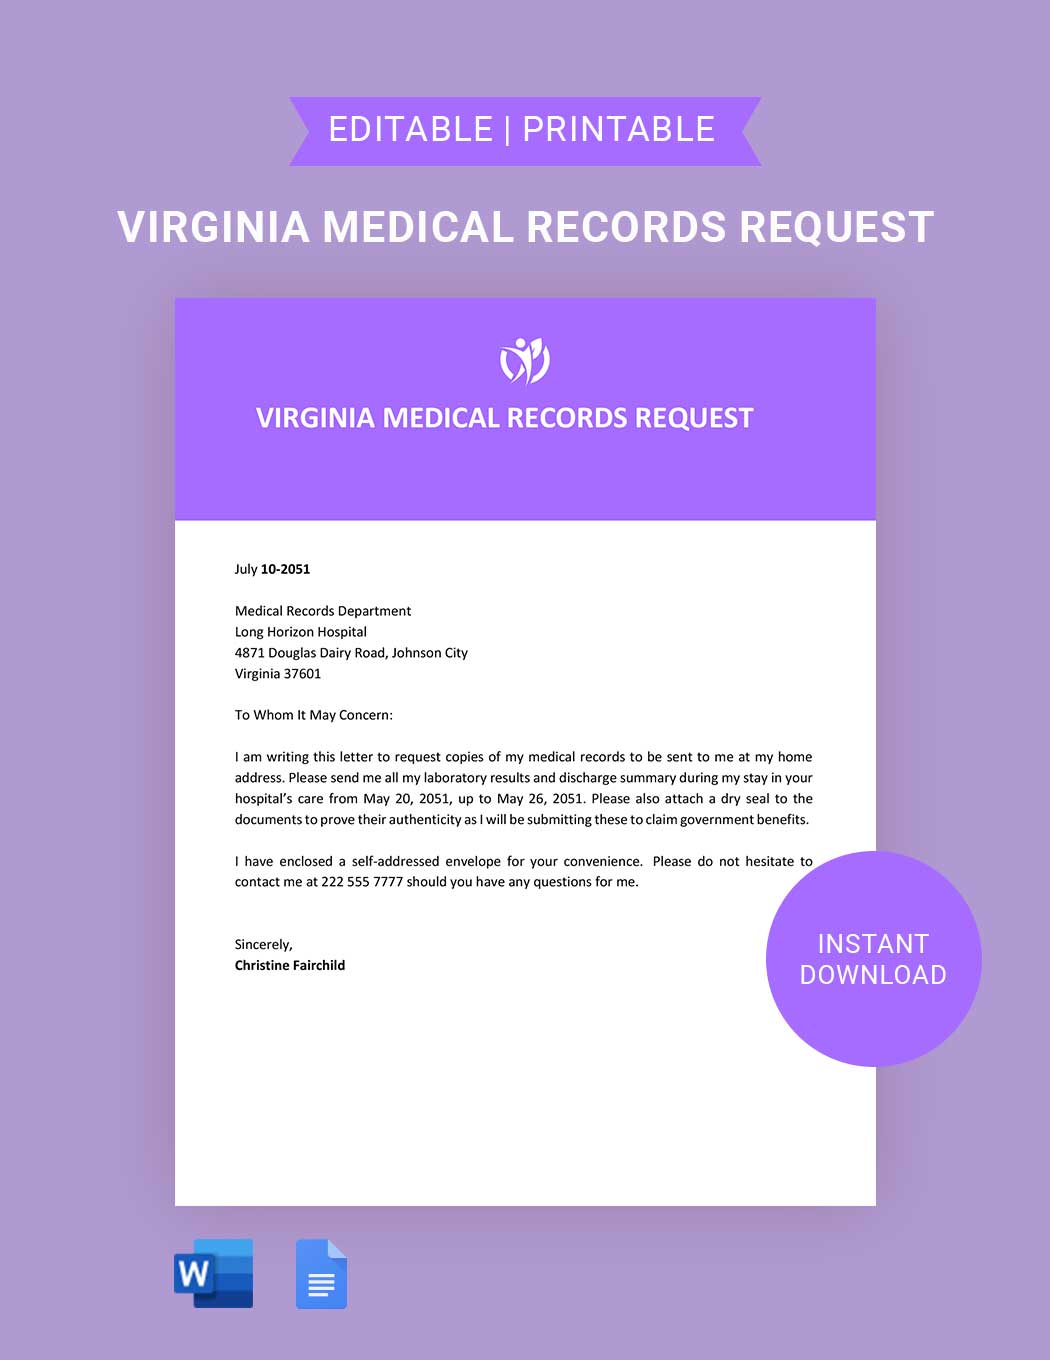 Virginia Medical Records Request Template in Word, Google Docs